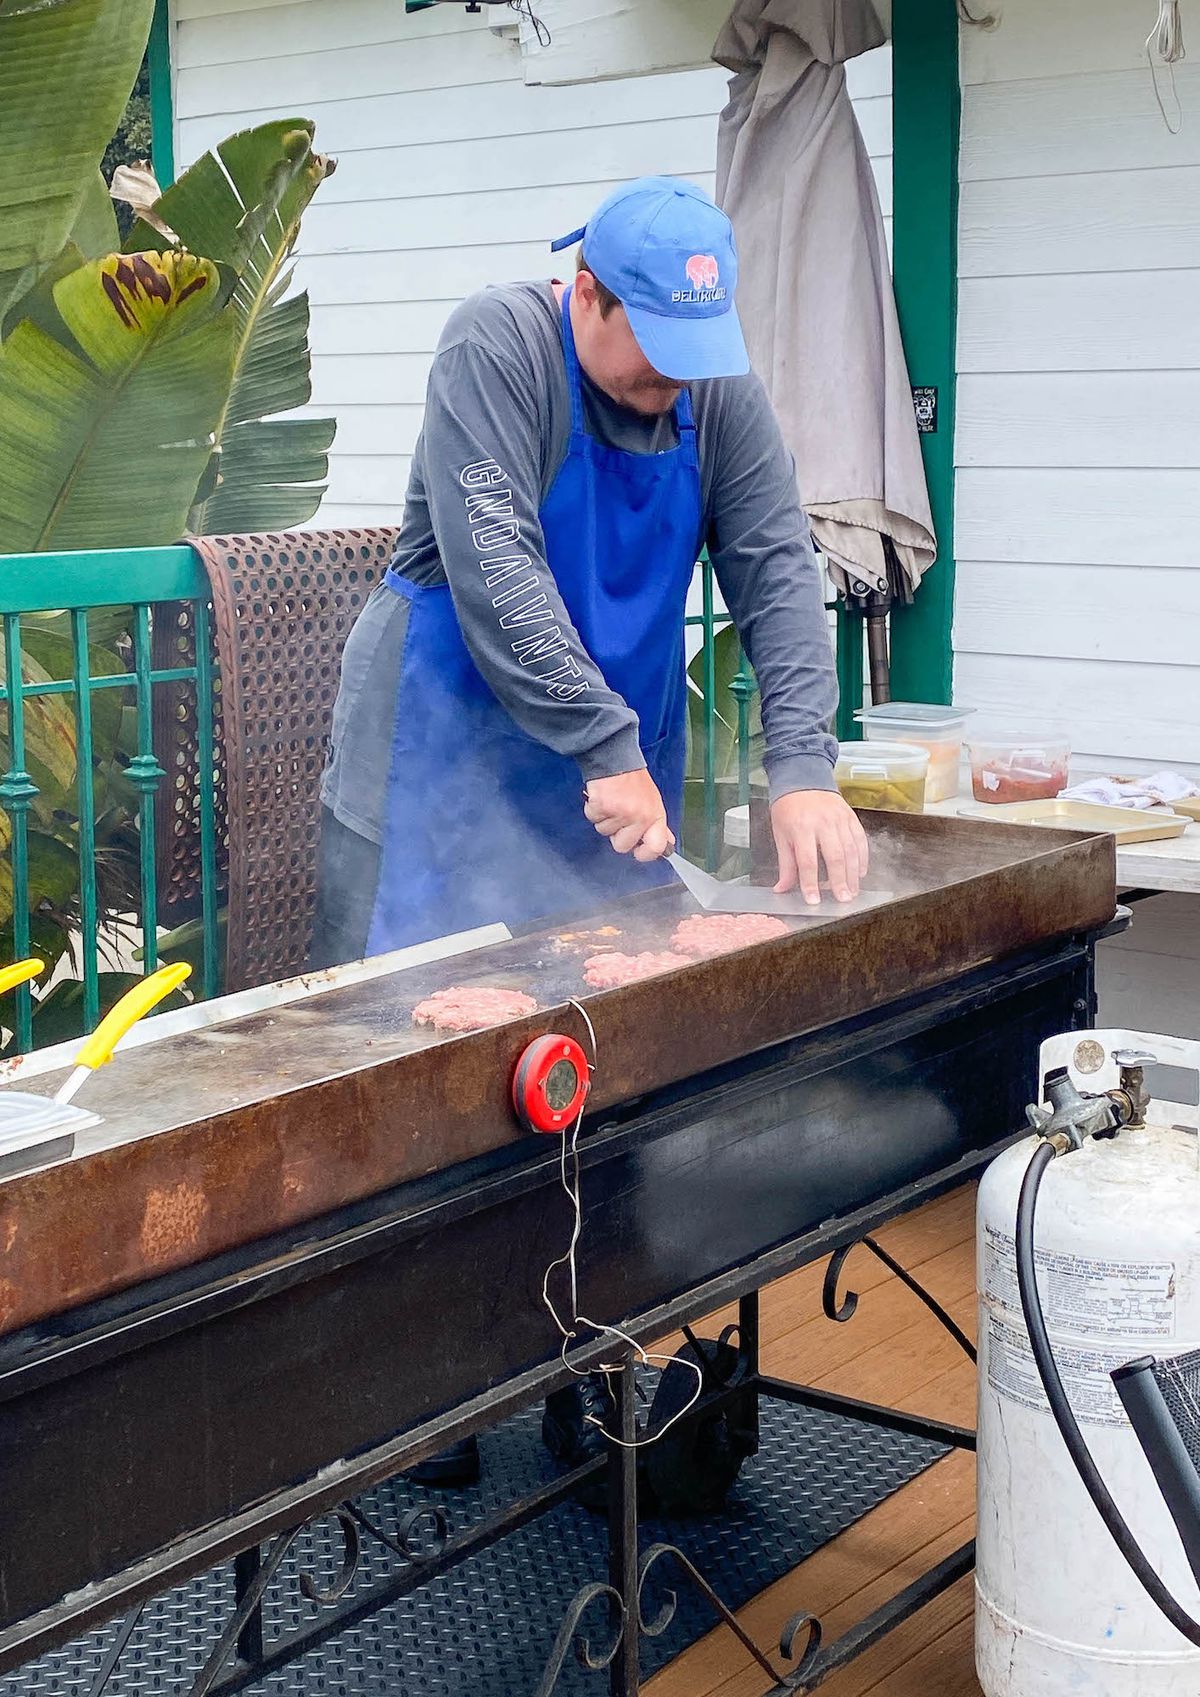 A man in a blue hat and apron presses on a beef patty on a griddle.